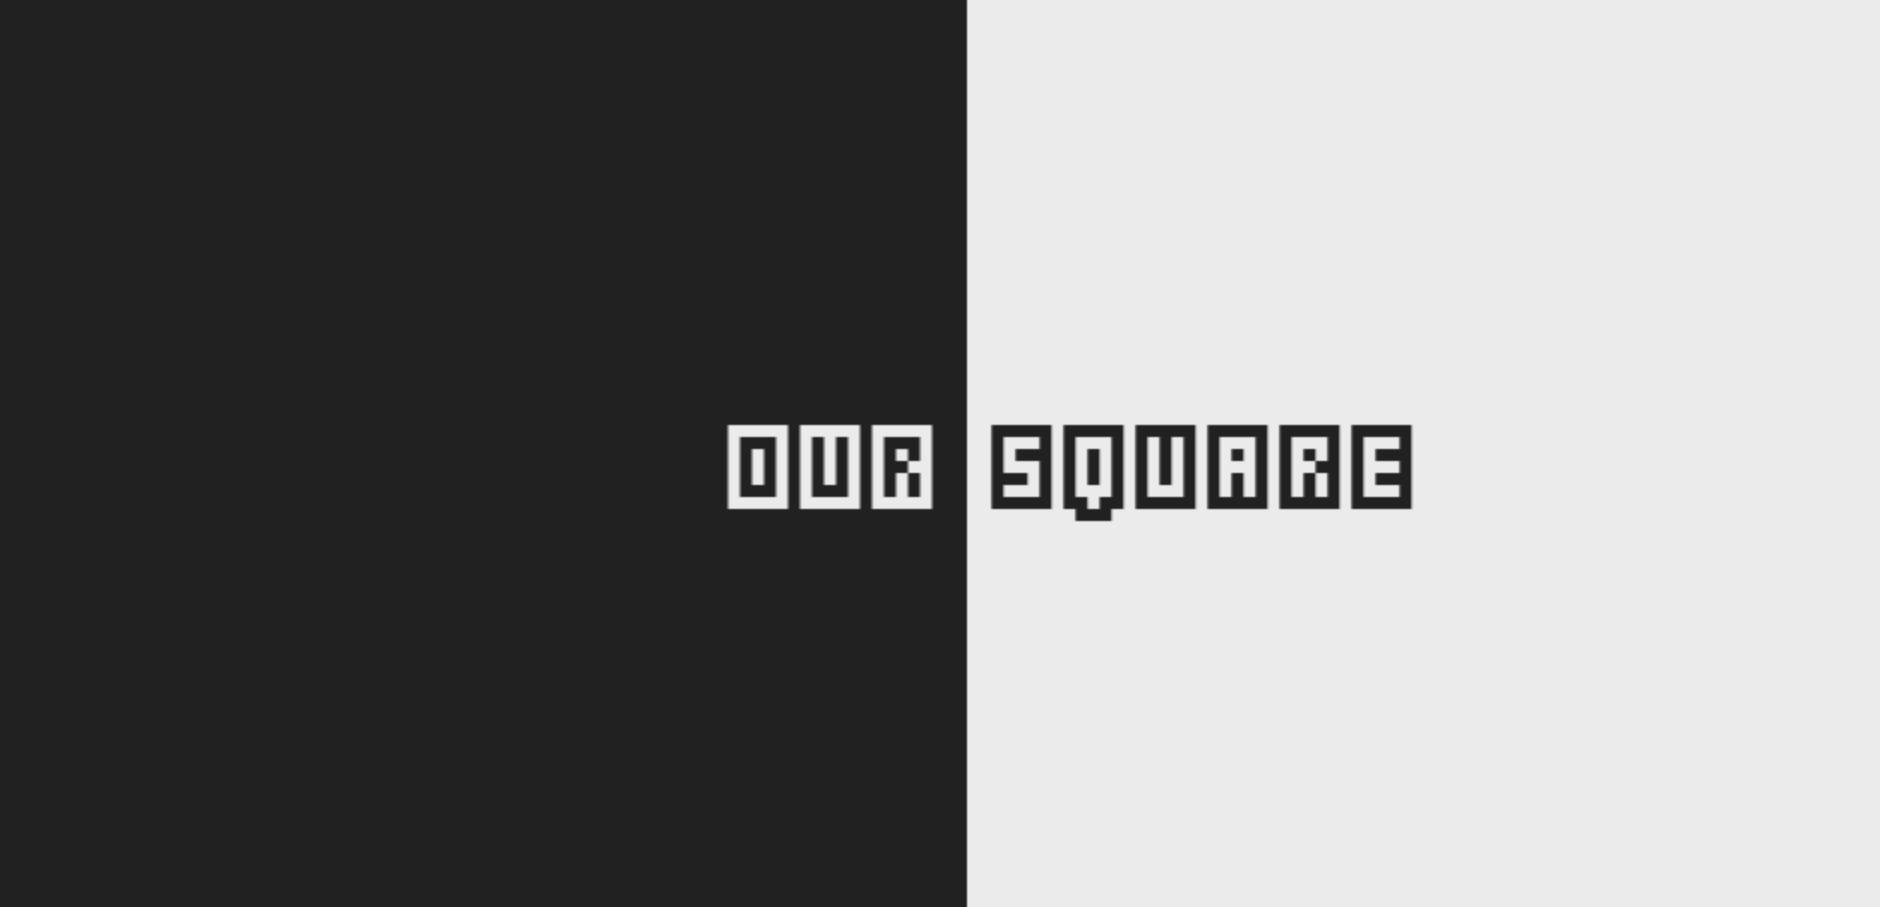 Our Square